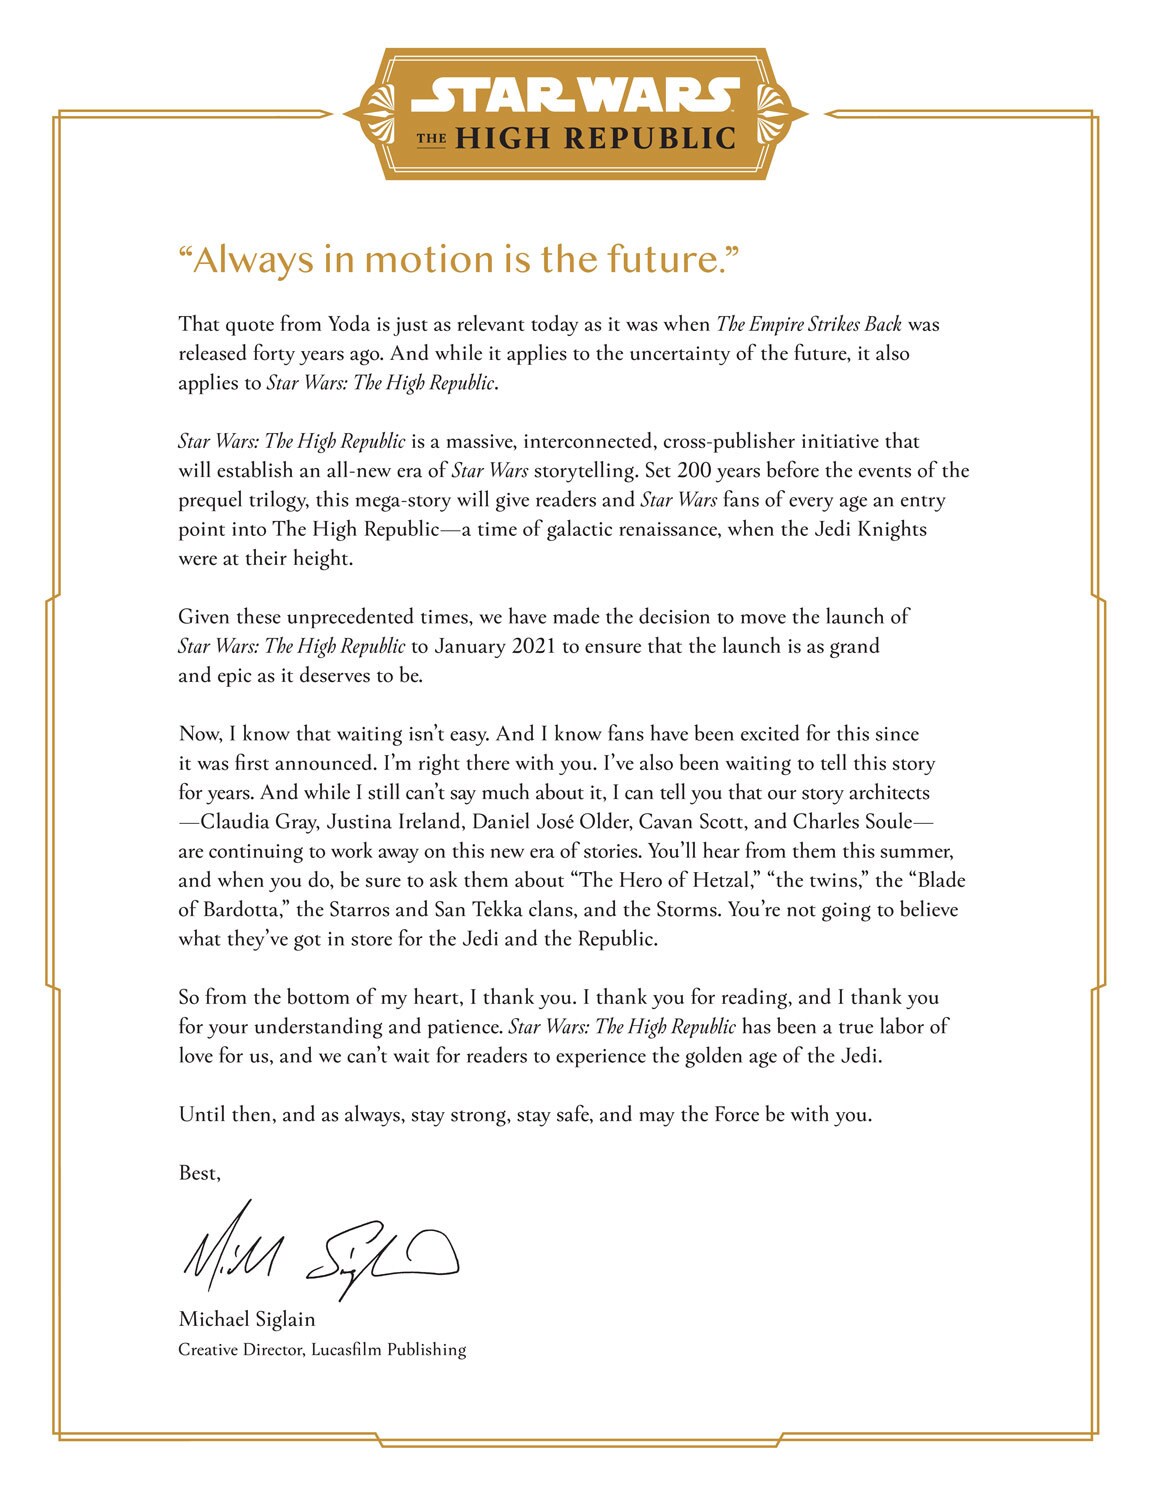 Letter from Lucasfilm's Michael Siglain on Star Wars: The High Republic.